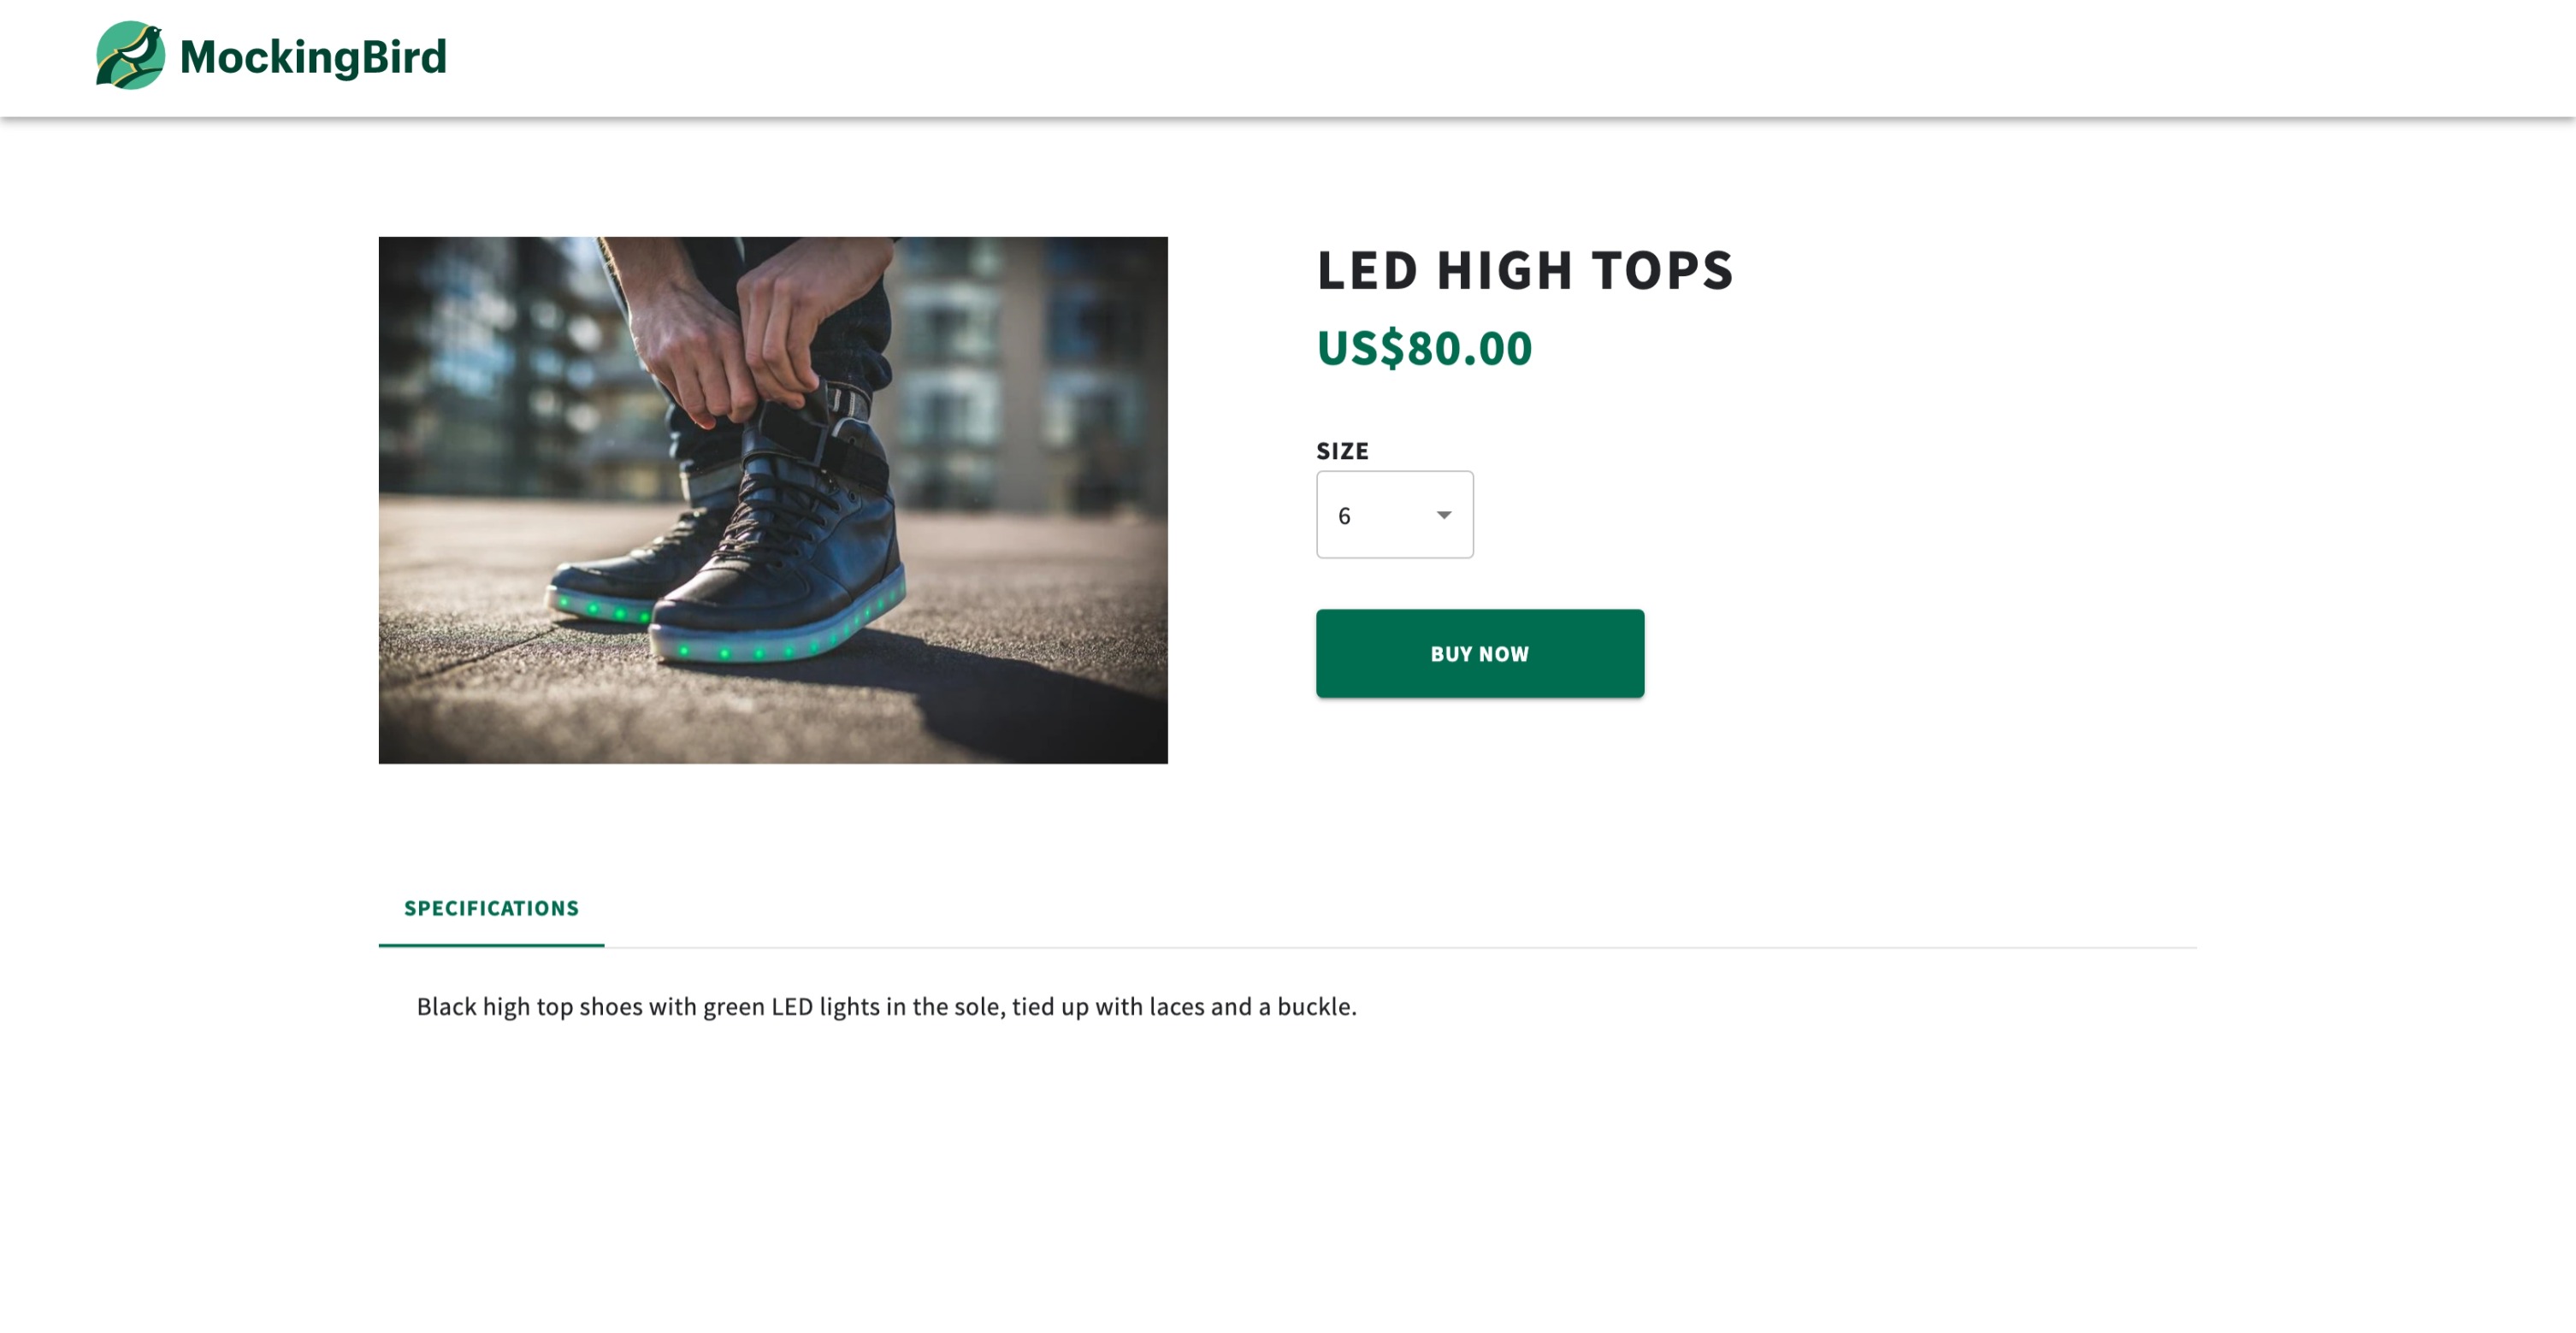 An image of the product description page with a buy now button